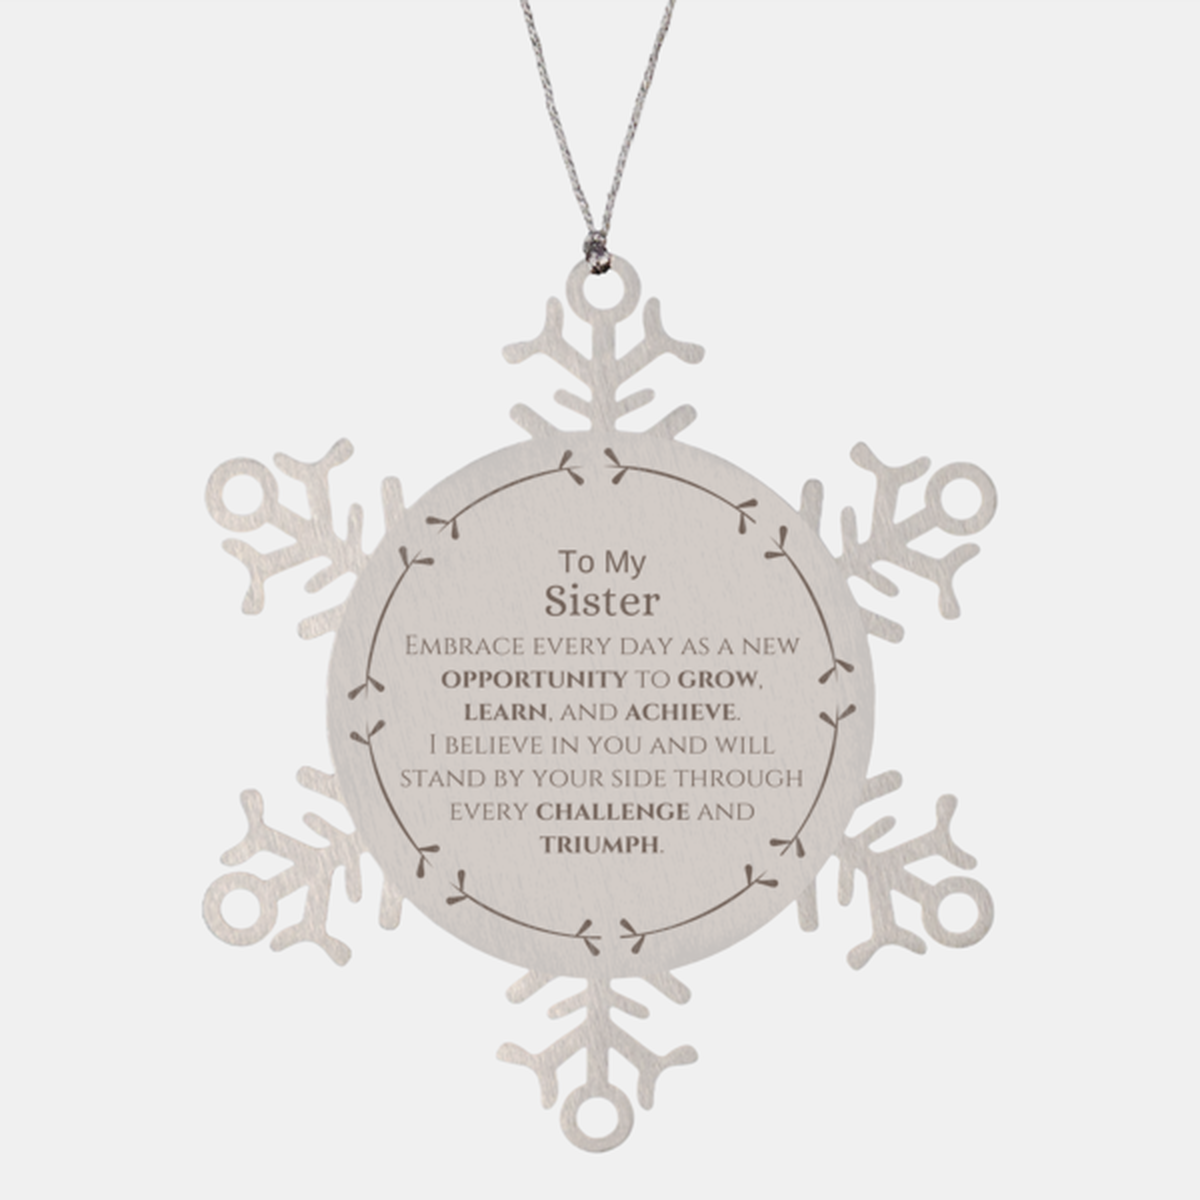 To My Sister Gifts, I believe in you and will stand by your side, Inspirational Snowflake Ornament For Sister, Birthday Christmas Motivational Sister Gifts